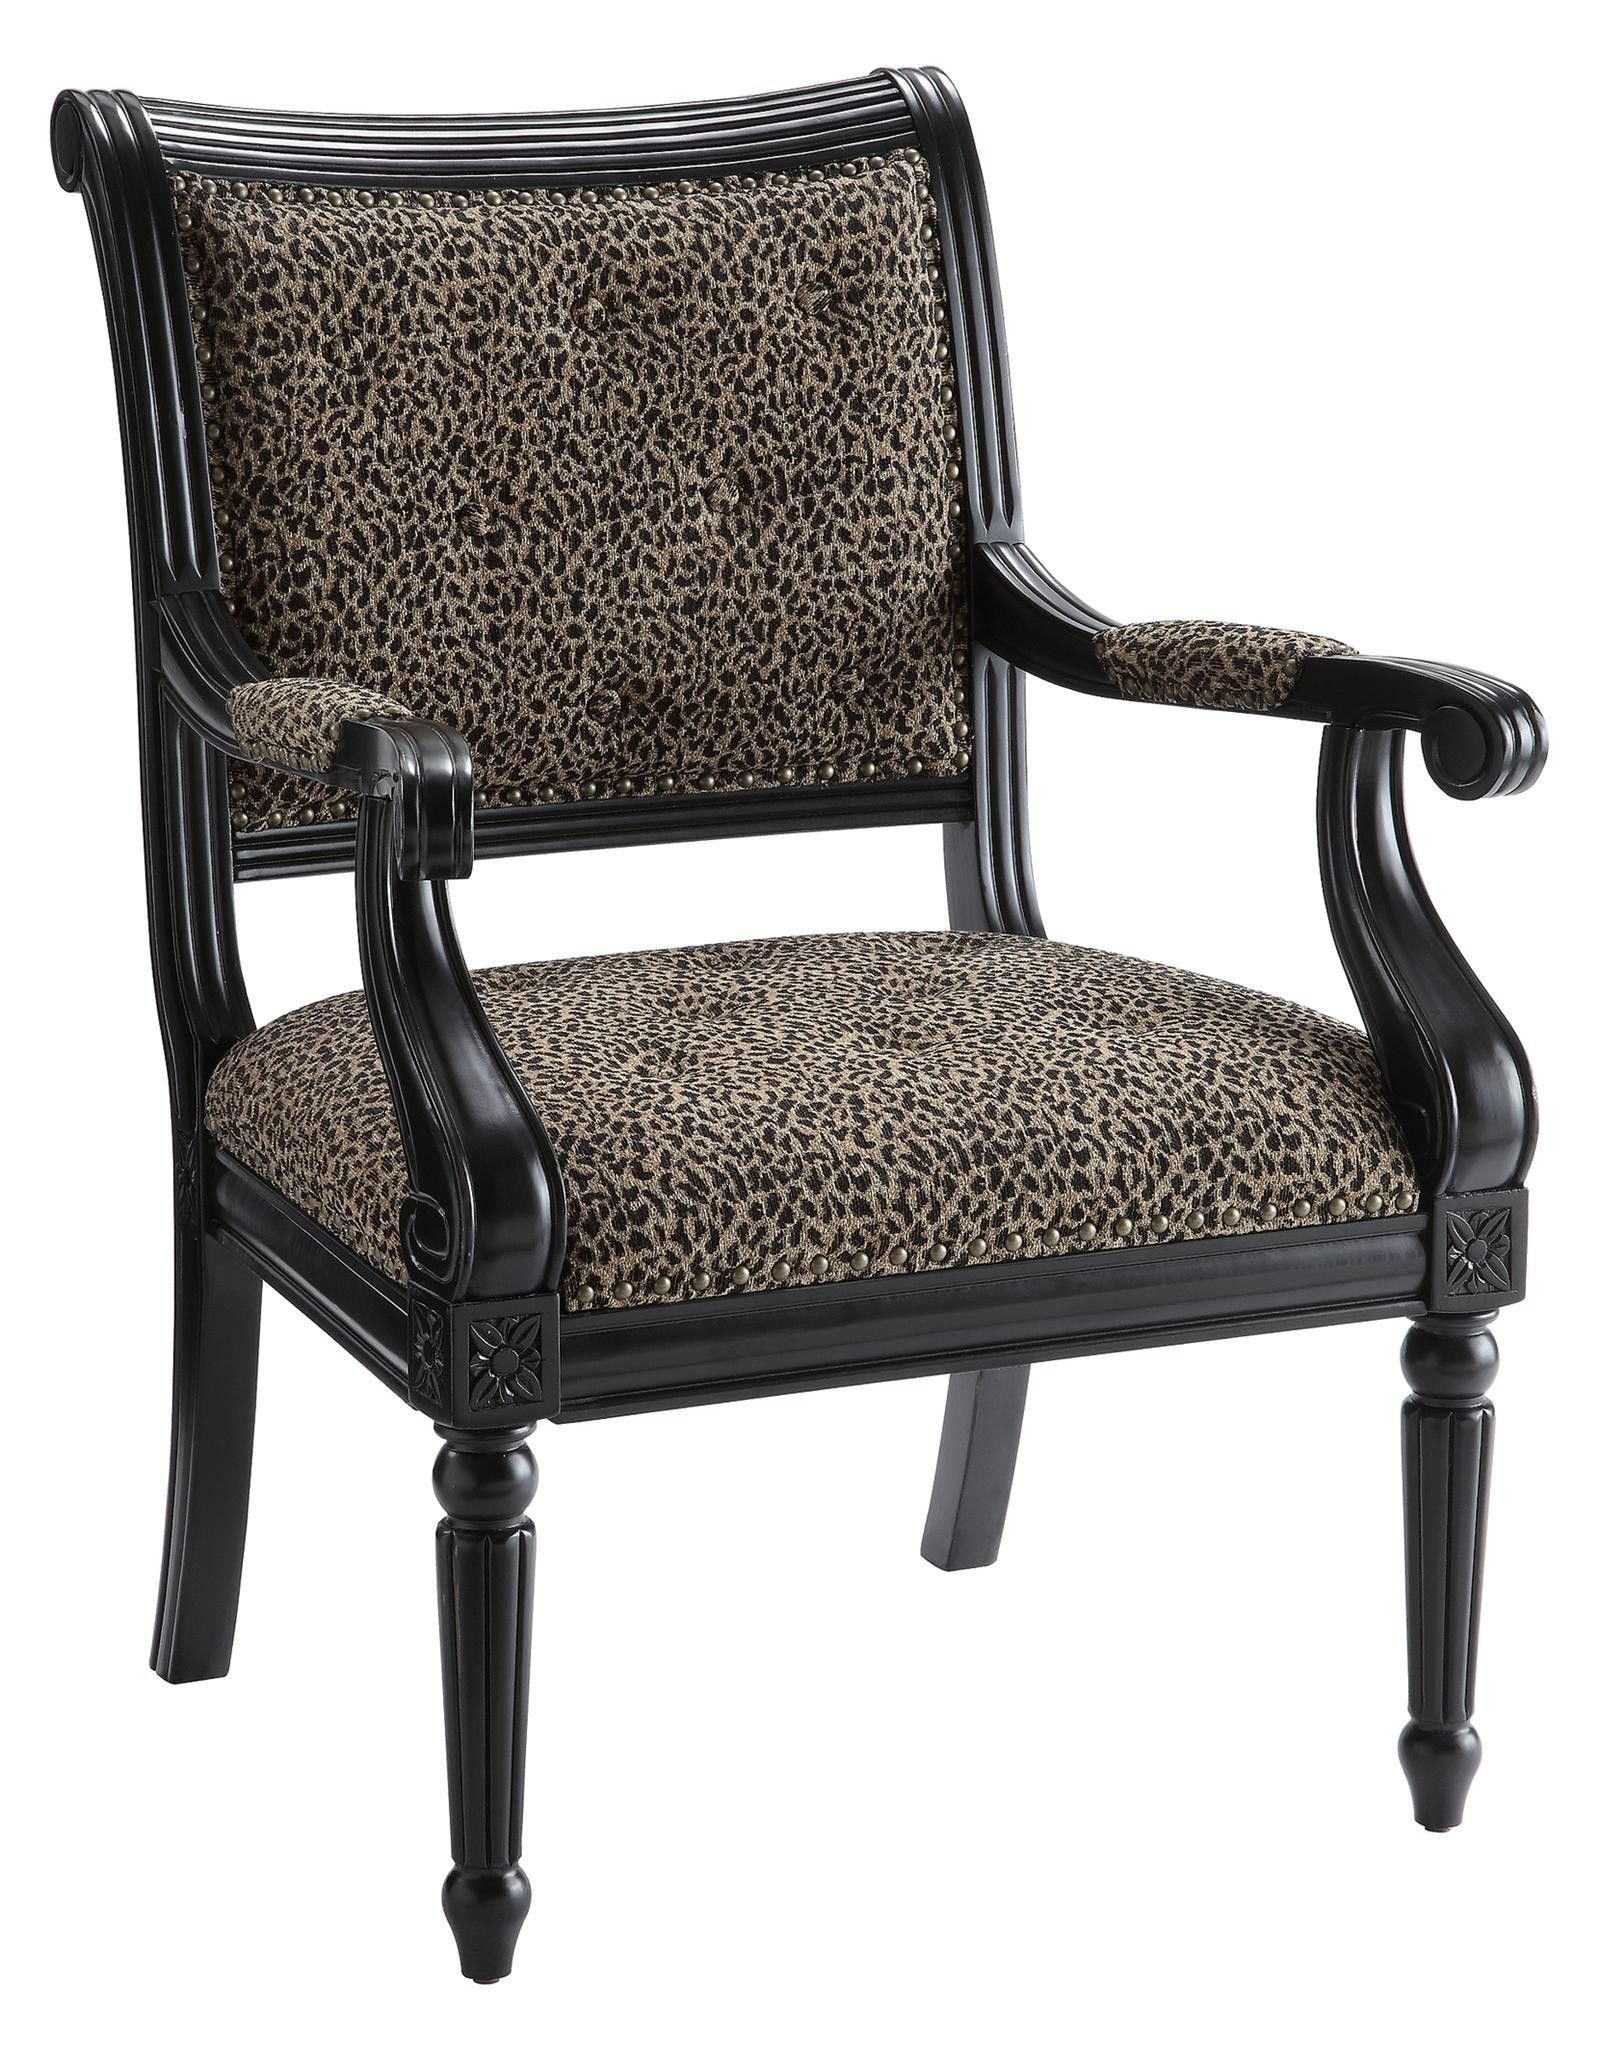 Crestview Collections Cheetah Print Arm Chair, Wood Upholstered Arm Chair with Black Finish